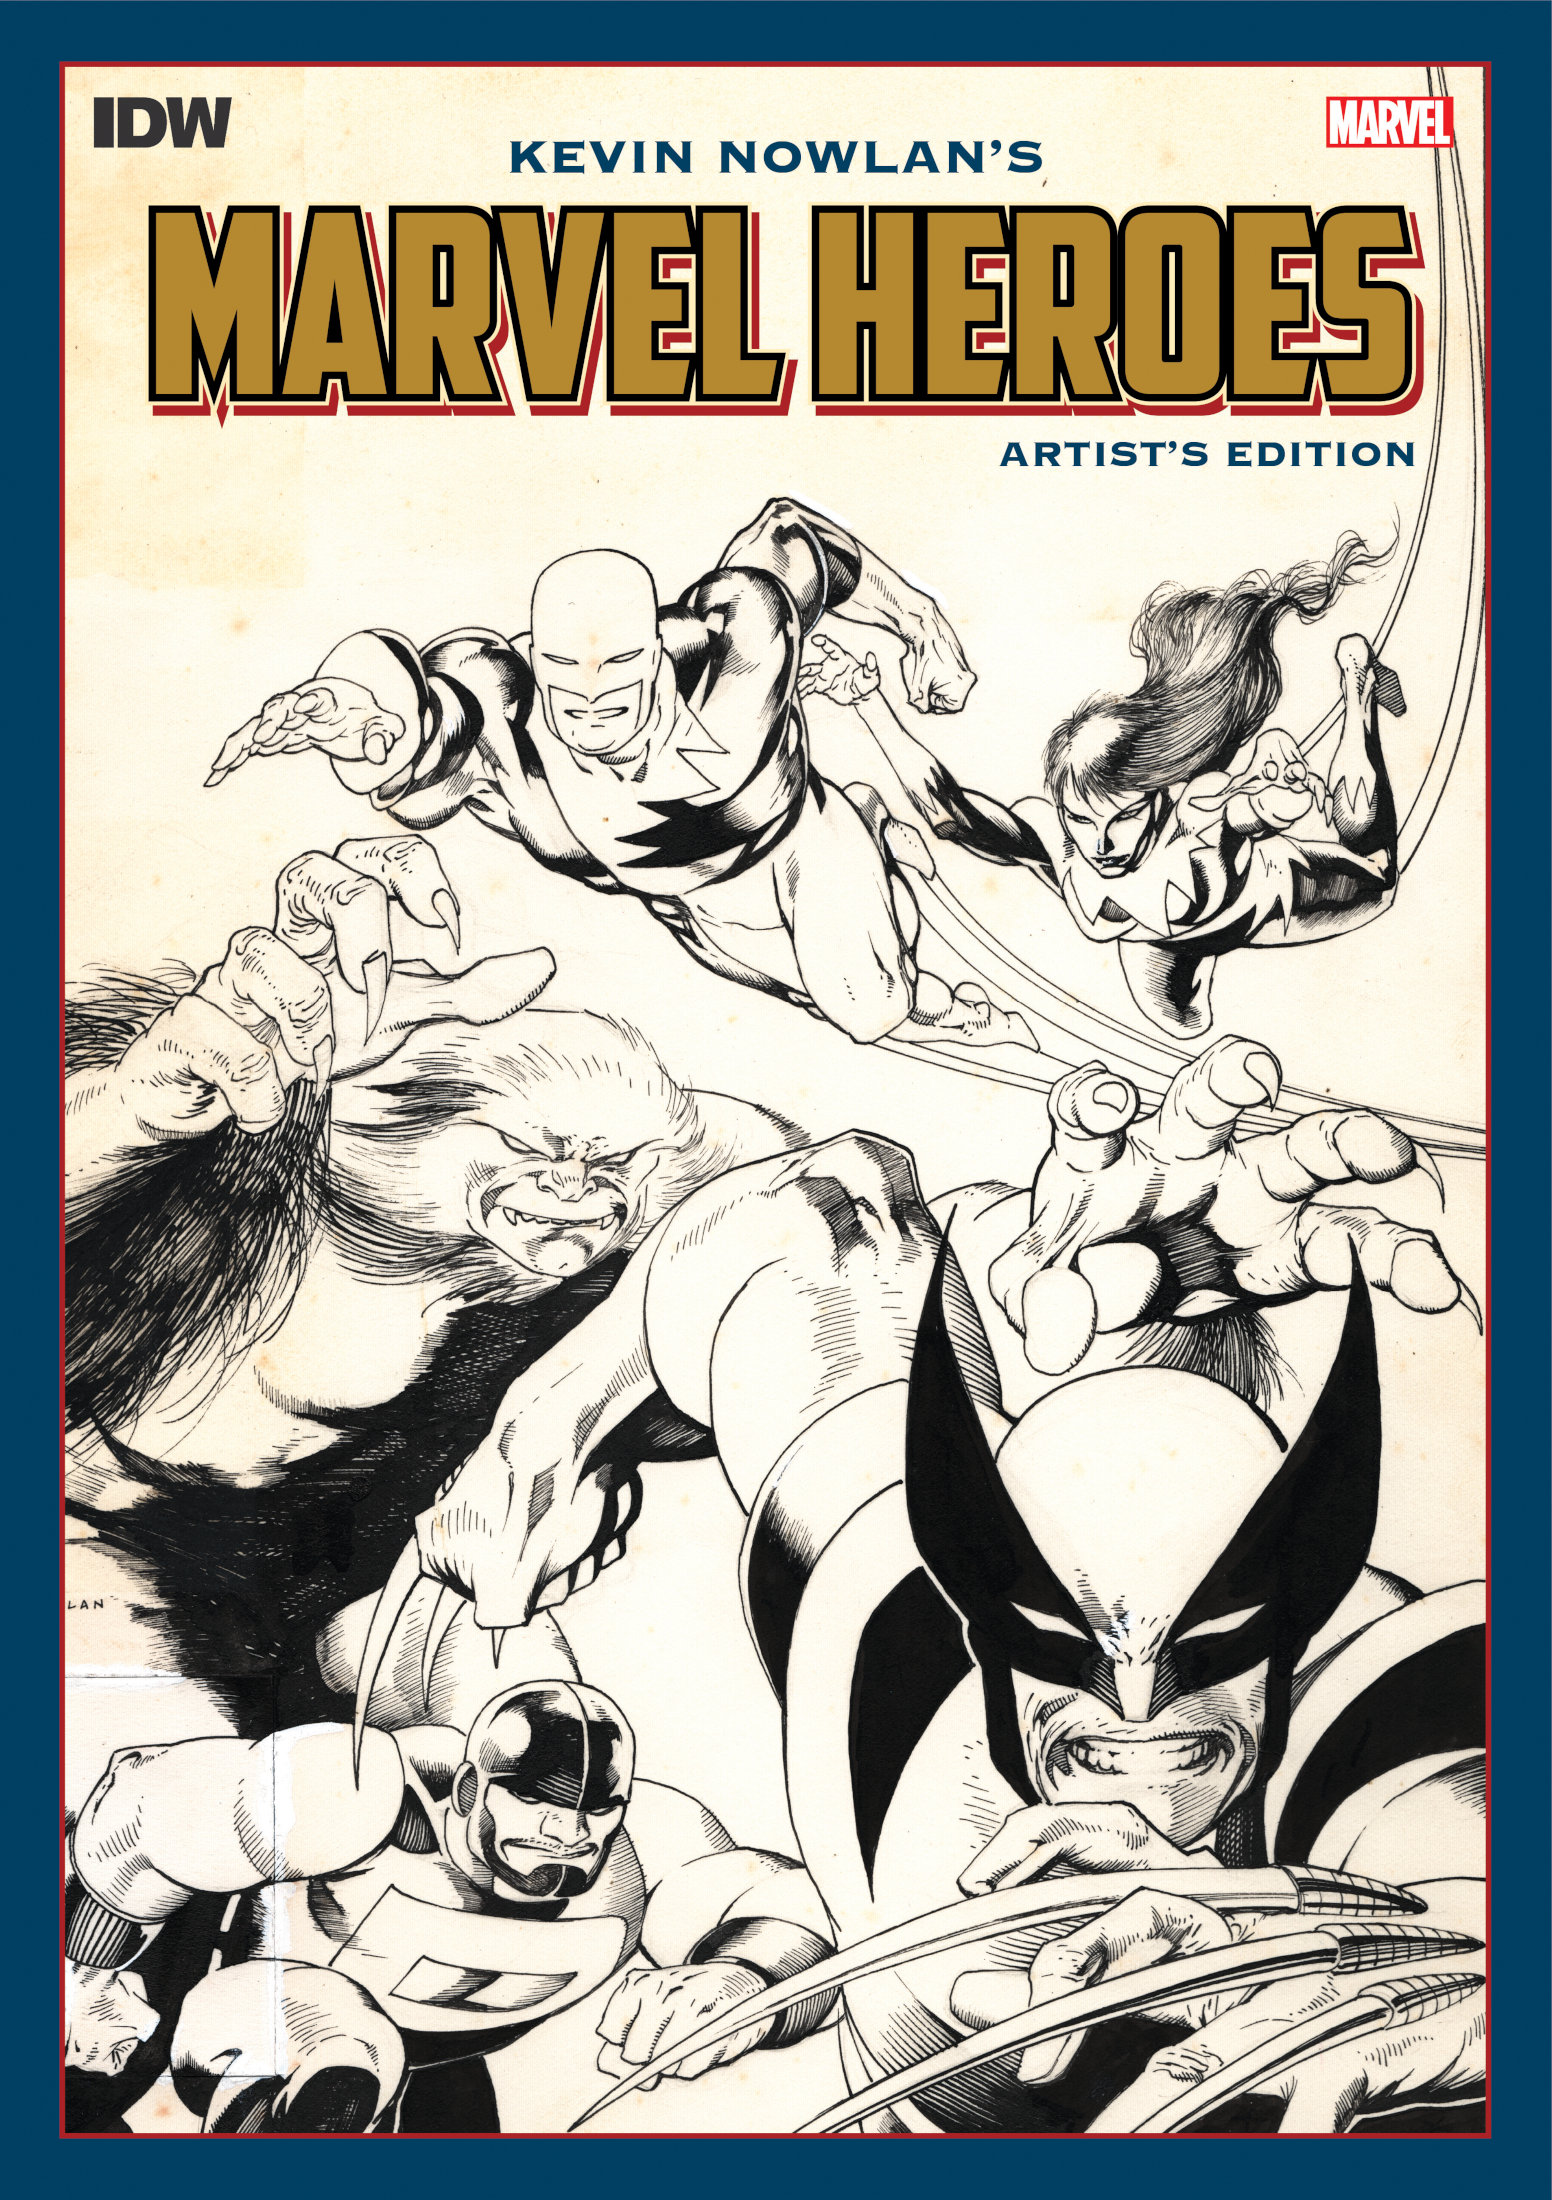 Kevin Nowlans Marvel Heroes Artists Edition prelim cover